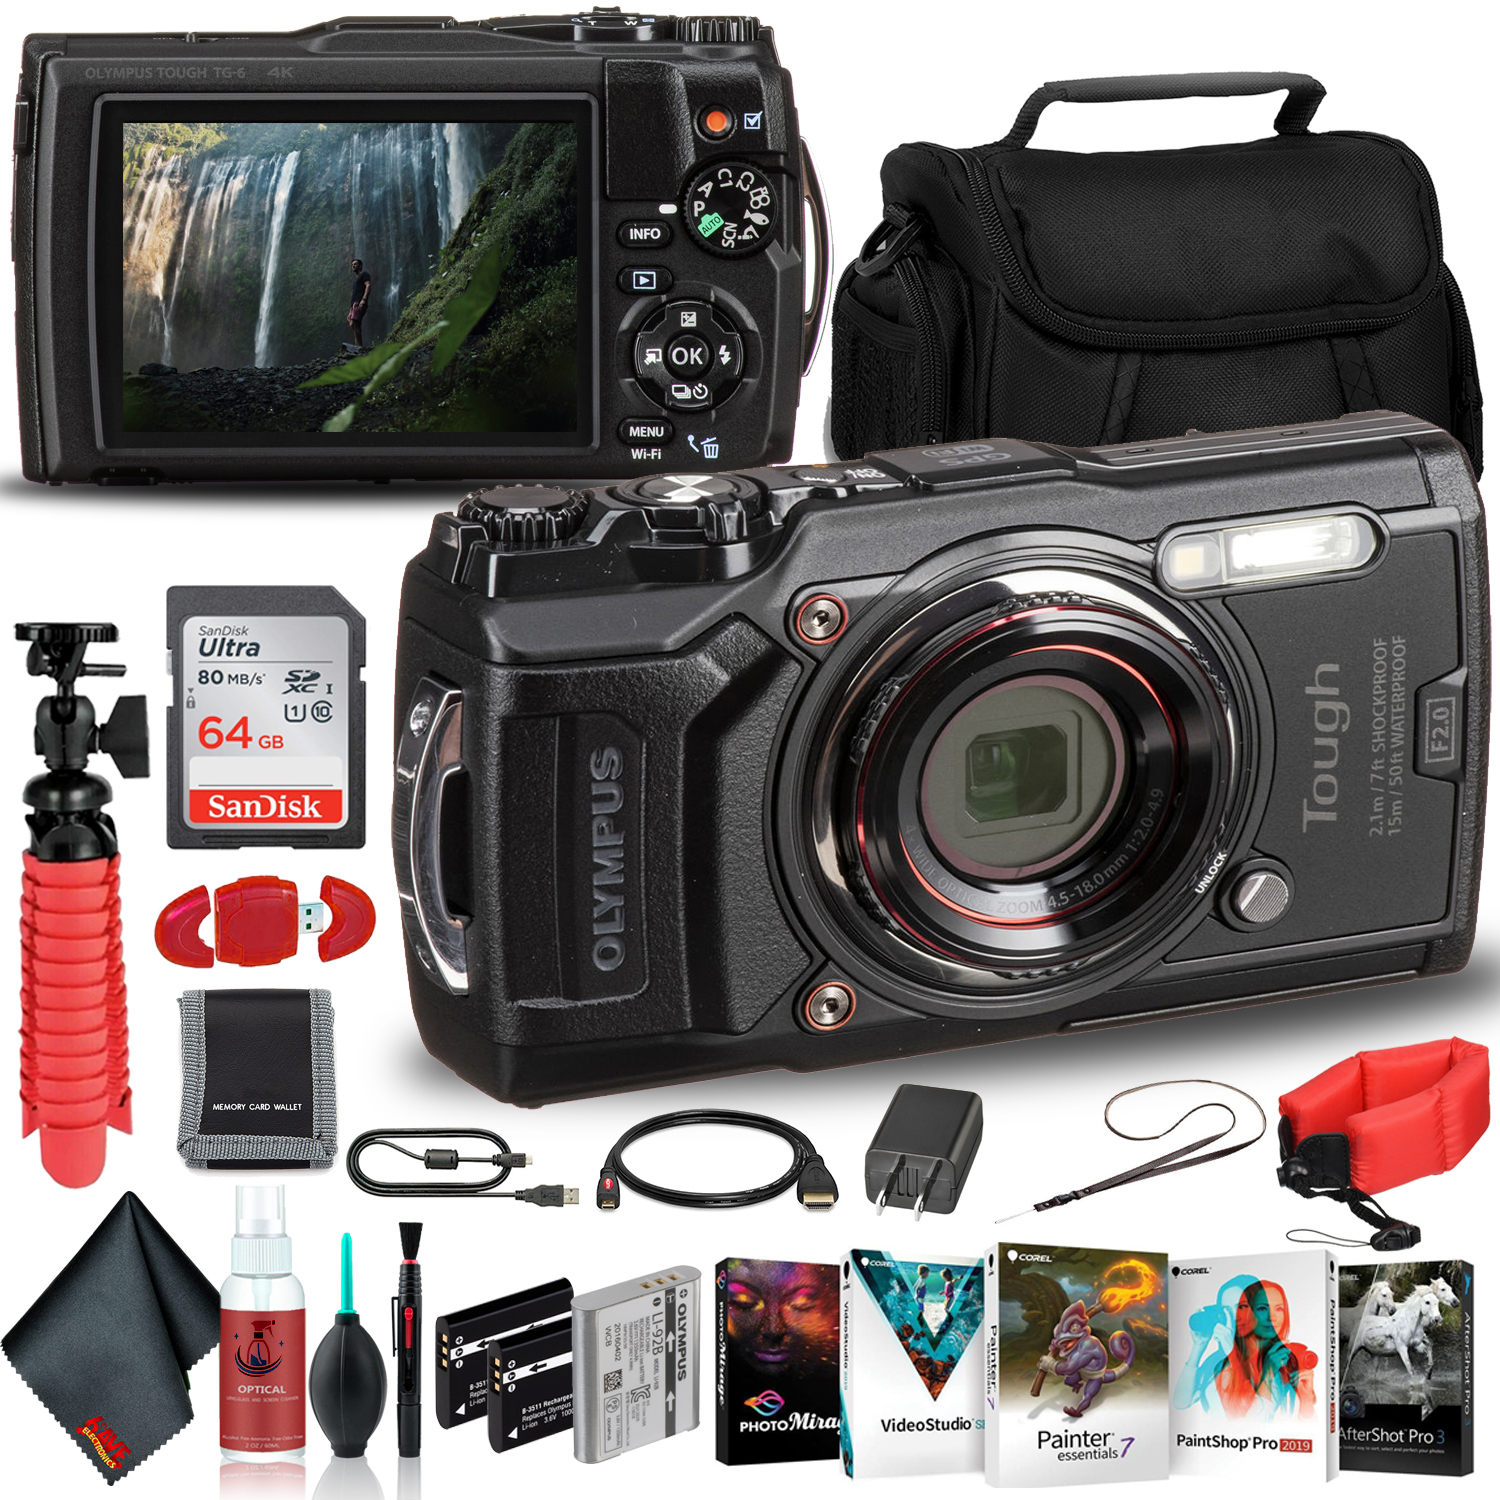 Olympus Tough TG-6 Waterproof Camera (Black) - Adventure Bundle - With 2 Extra Batteries + Float Strap + Sandisk 64GB Ultra Memory Card + Padded Case + Flex Tripod + Photo Software Suite + More - image 1 of 7